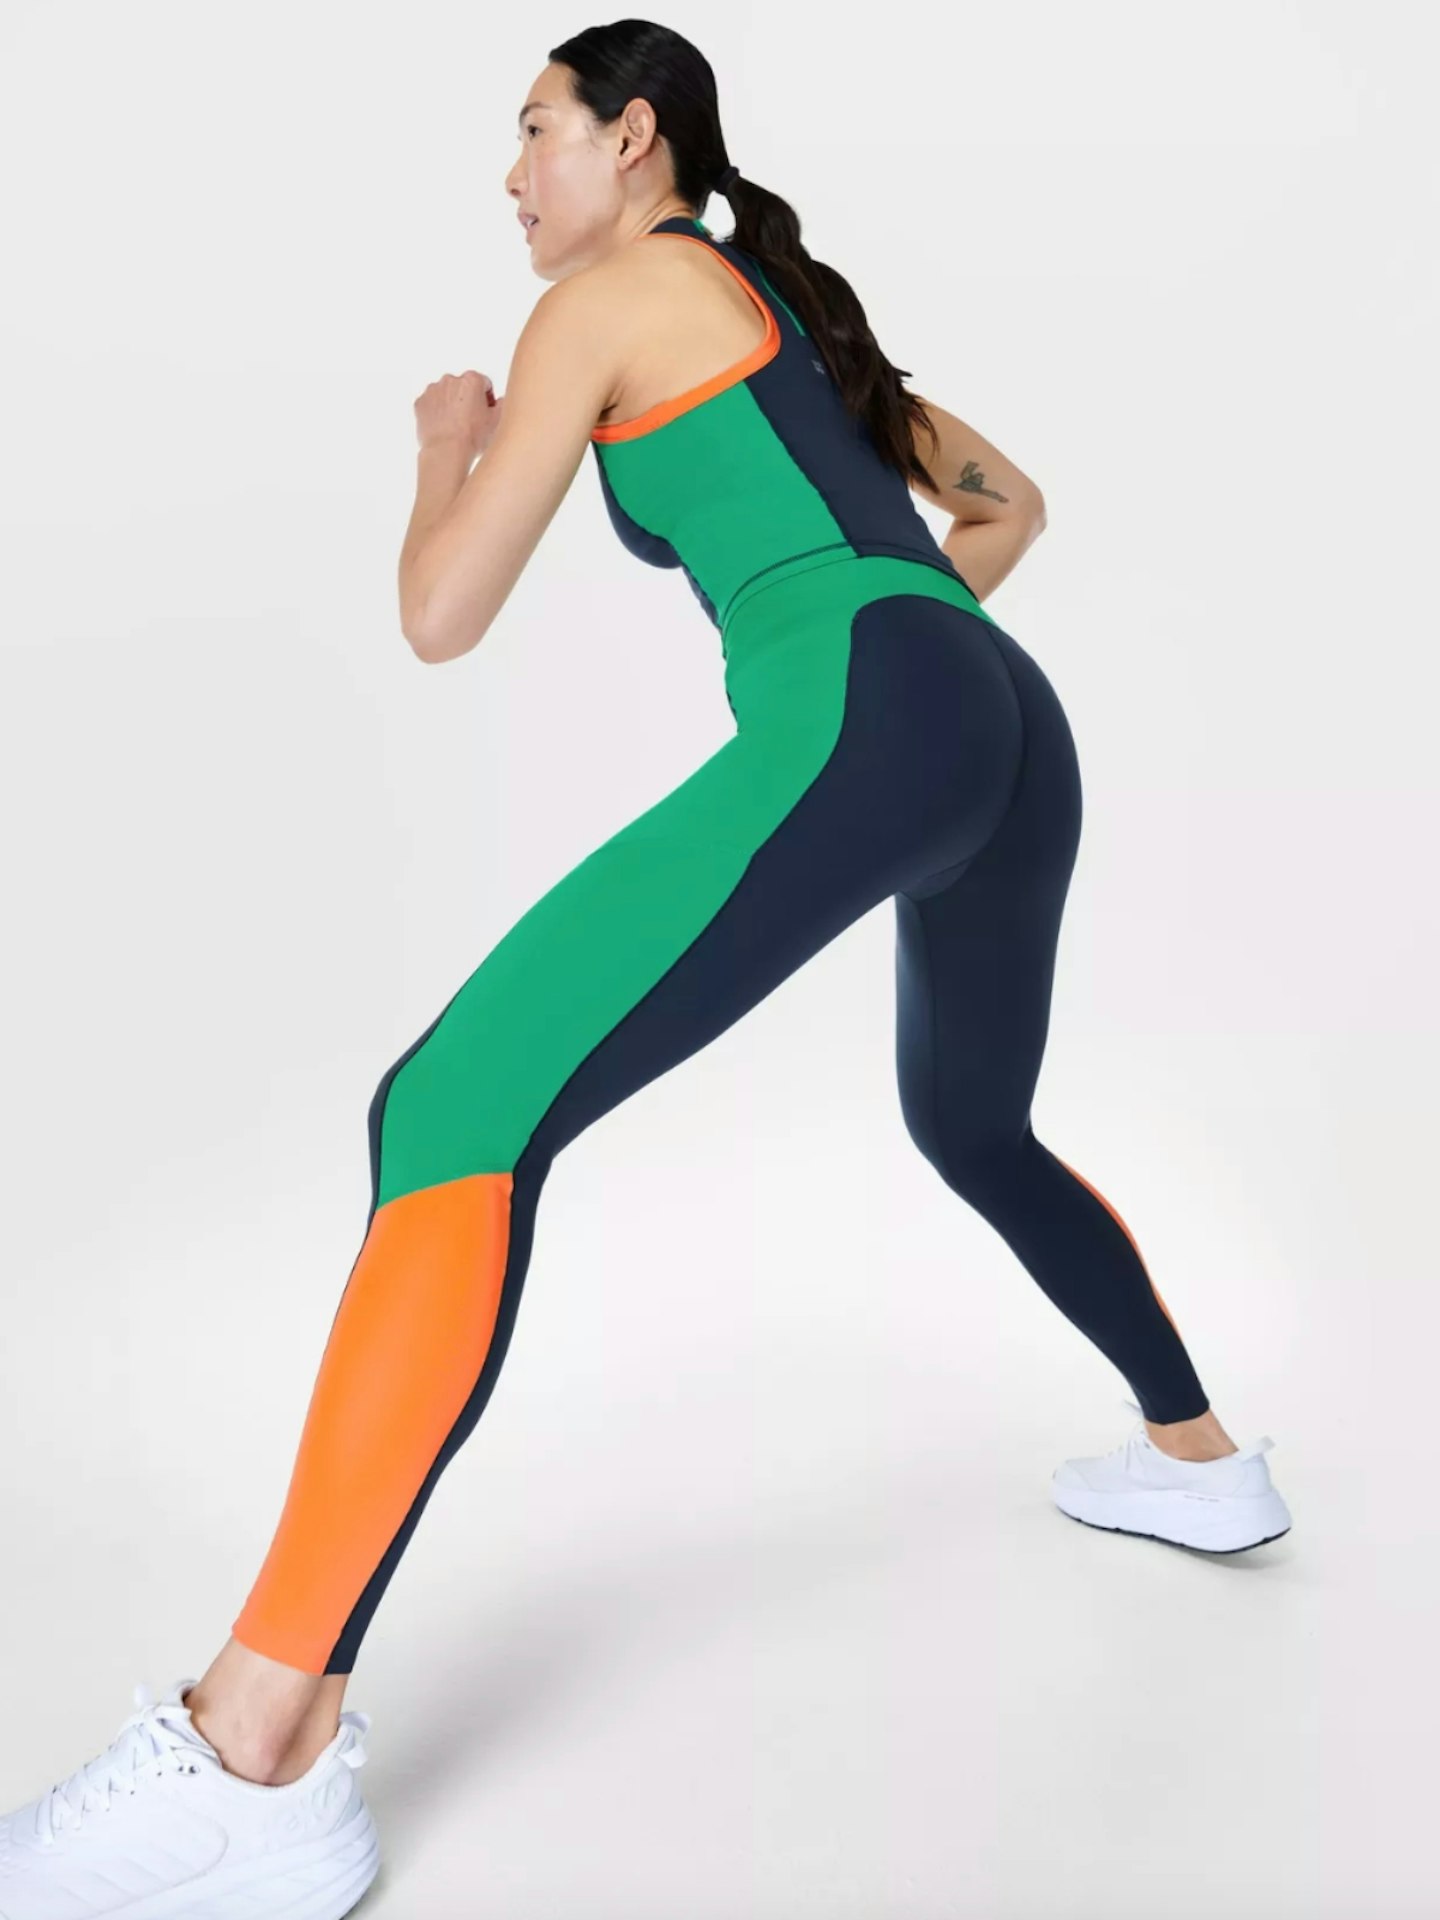 Sweaty Betty Hampstead - Look and feel powerful in the new limited